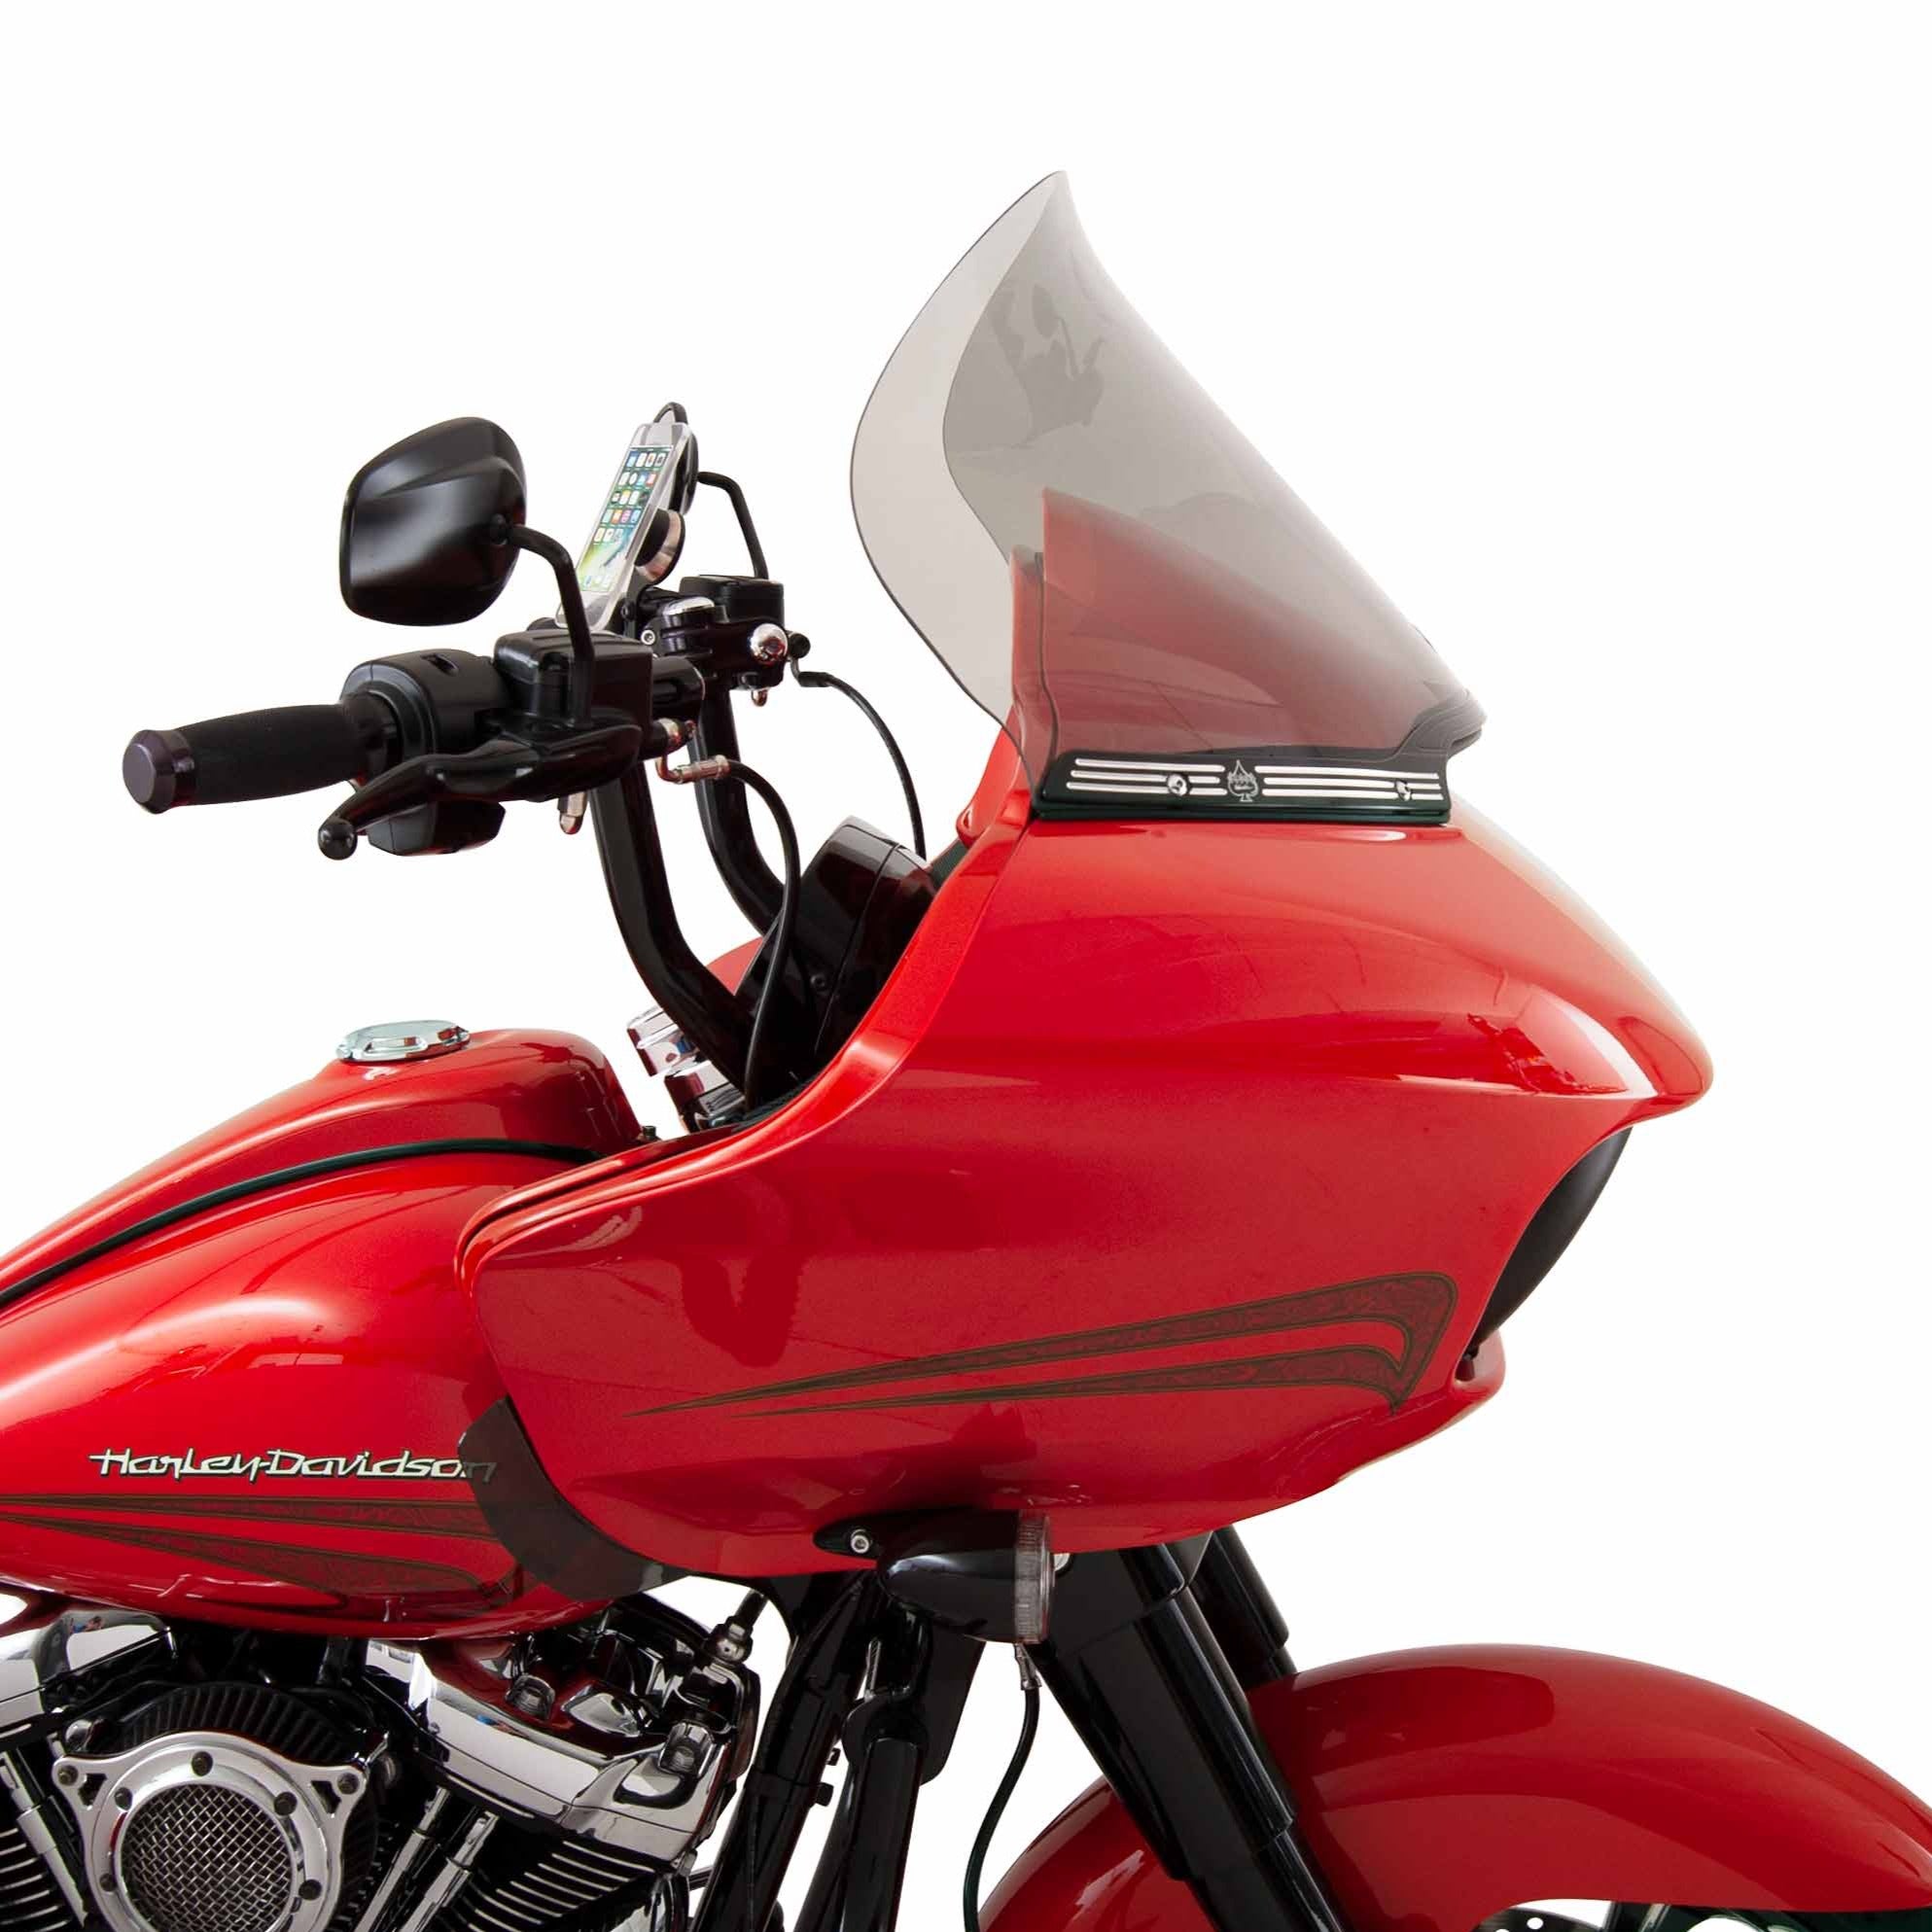 12" Pro-Touring Tint Flare™ Windshields for Harley-Davidson 2015-2024 Road Glide motorcycle models(15" Pro-Touring - Tint)